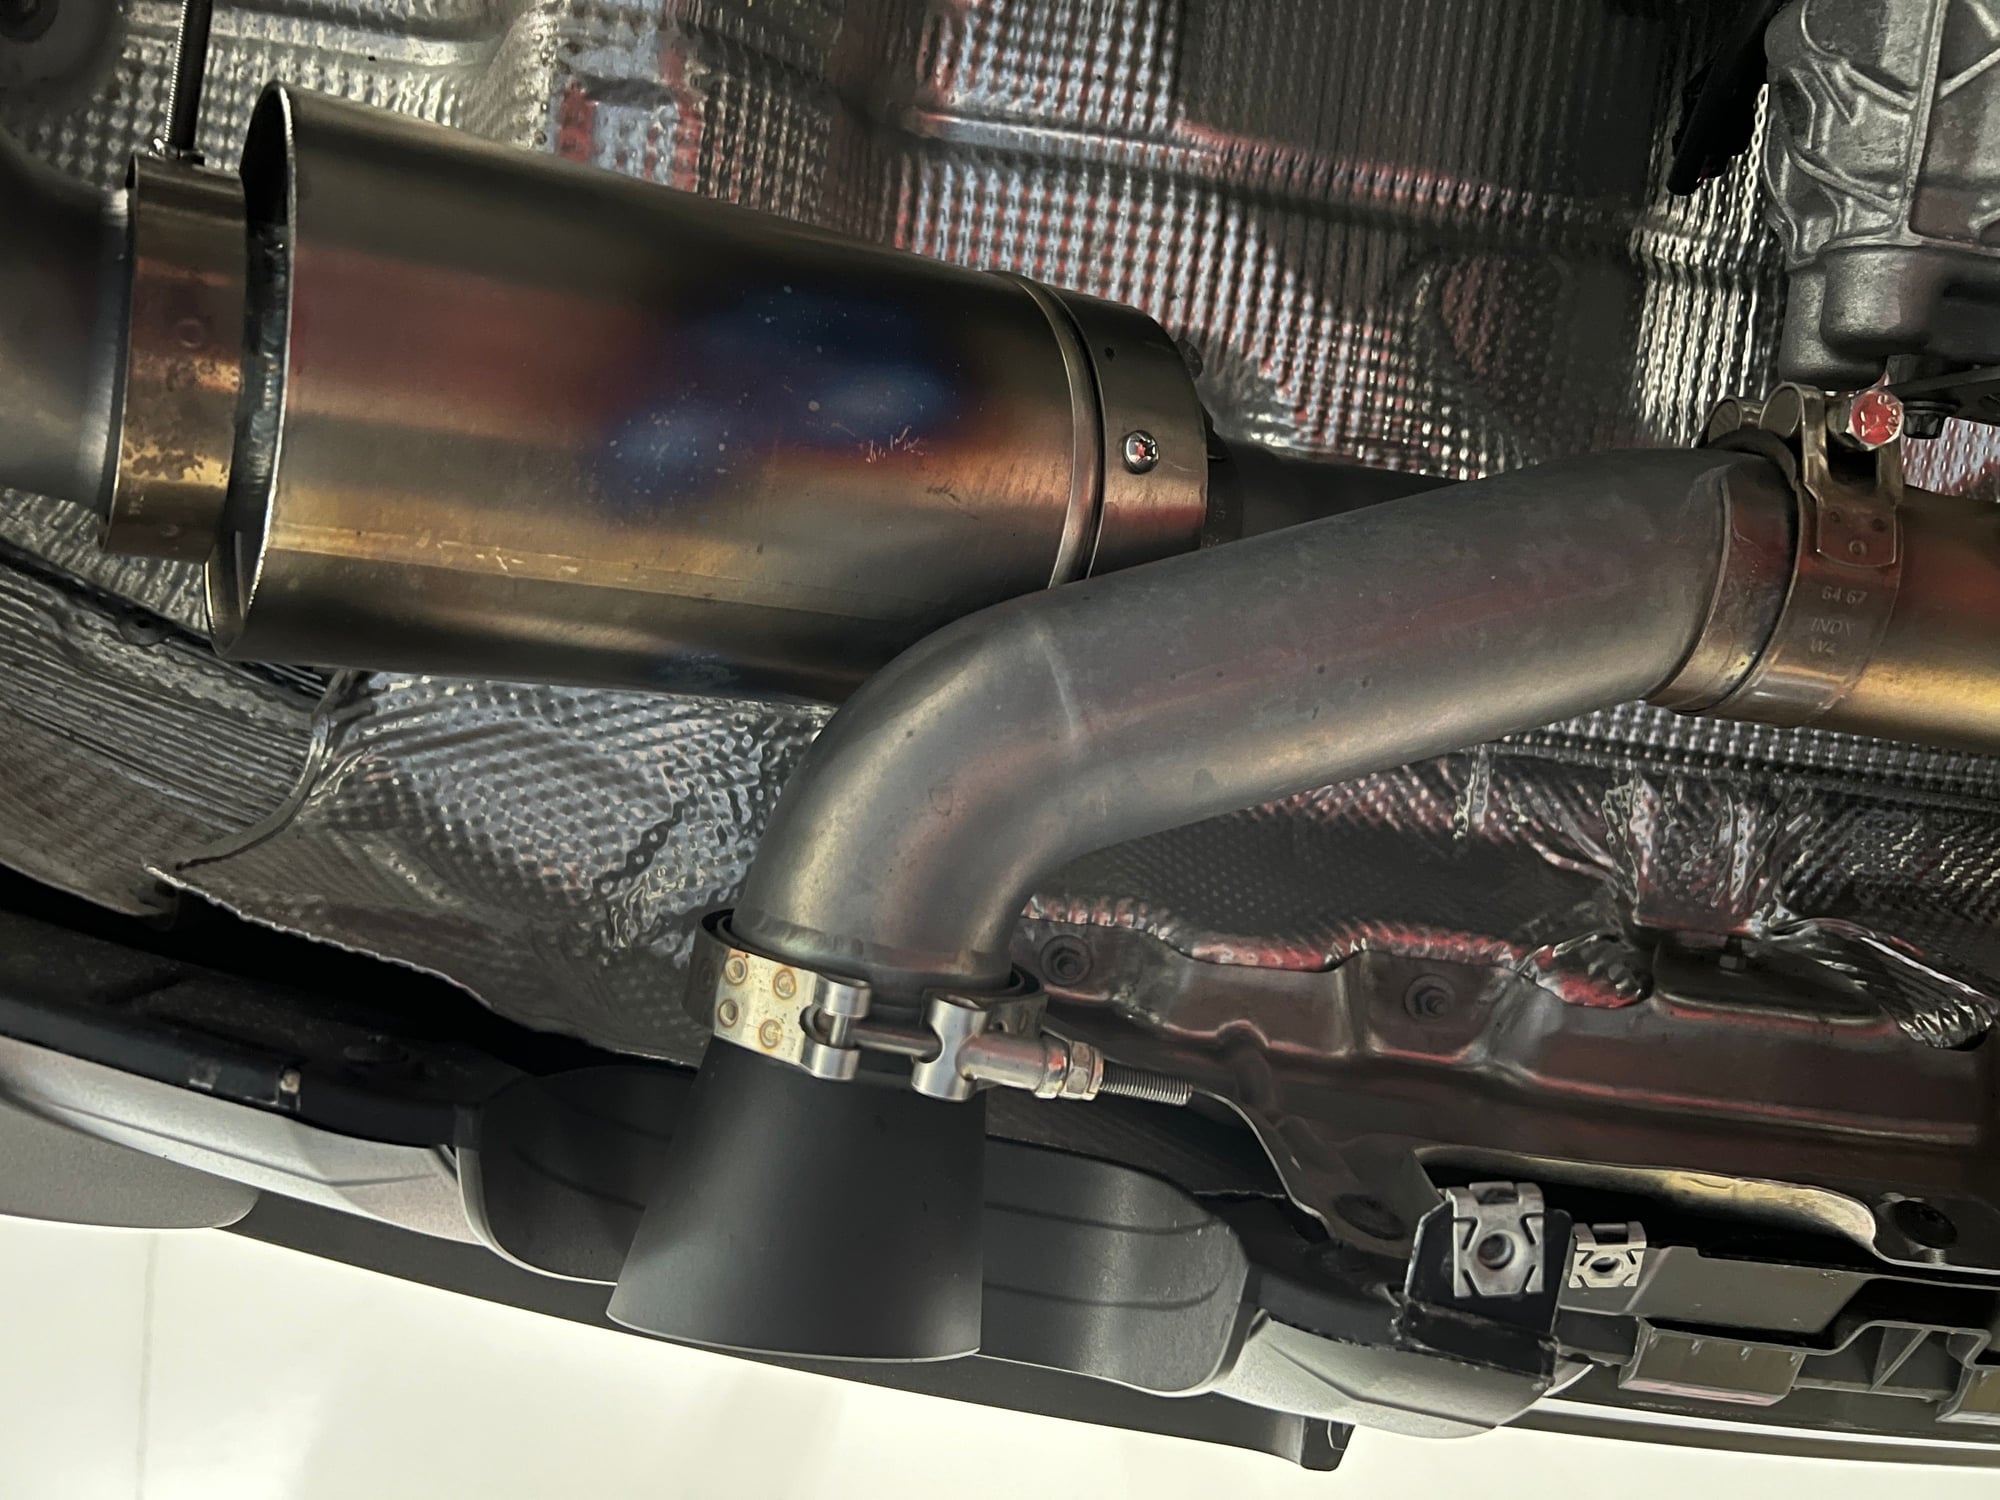 Engine - Exhaust - 718 GT4 Spyder GTS JCR TITANIUM SUPERLIGHT RACE PIPE (SILENCED) and non silenced - Used - 2020 to 2022 Porsche 718 Boxster - 2020 to 2022 Porsche 718 Cayman - 2020 to 2022 Porsche 718 Spyder - 2020 to 2022 Porsche 718 - Dakota Dunes, SD 57049, United States